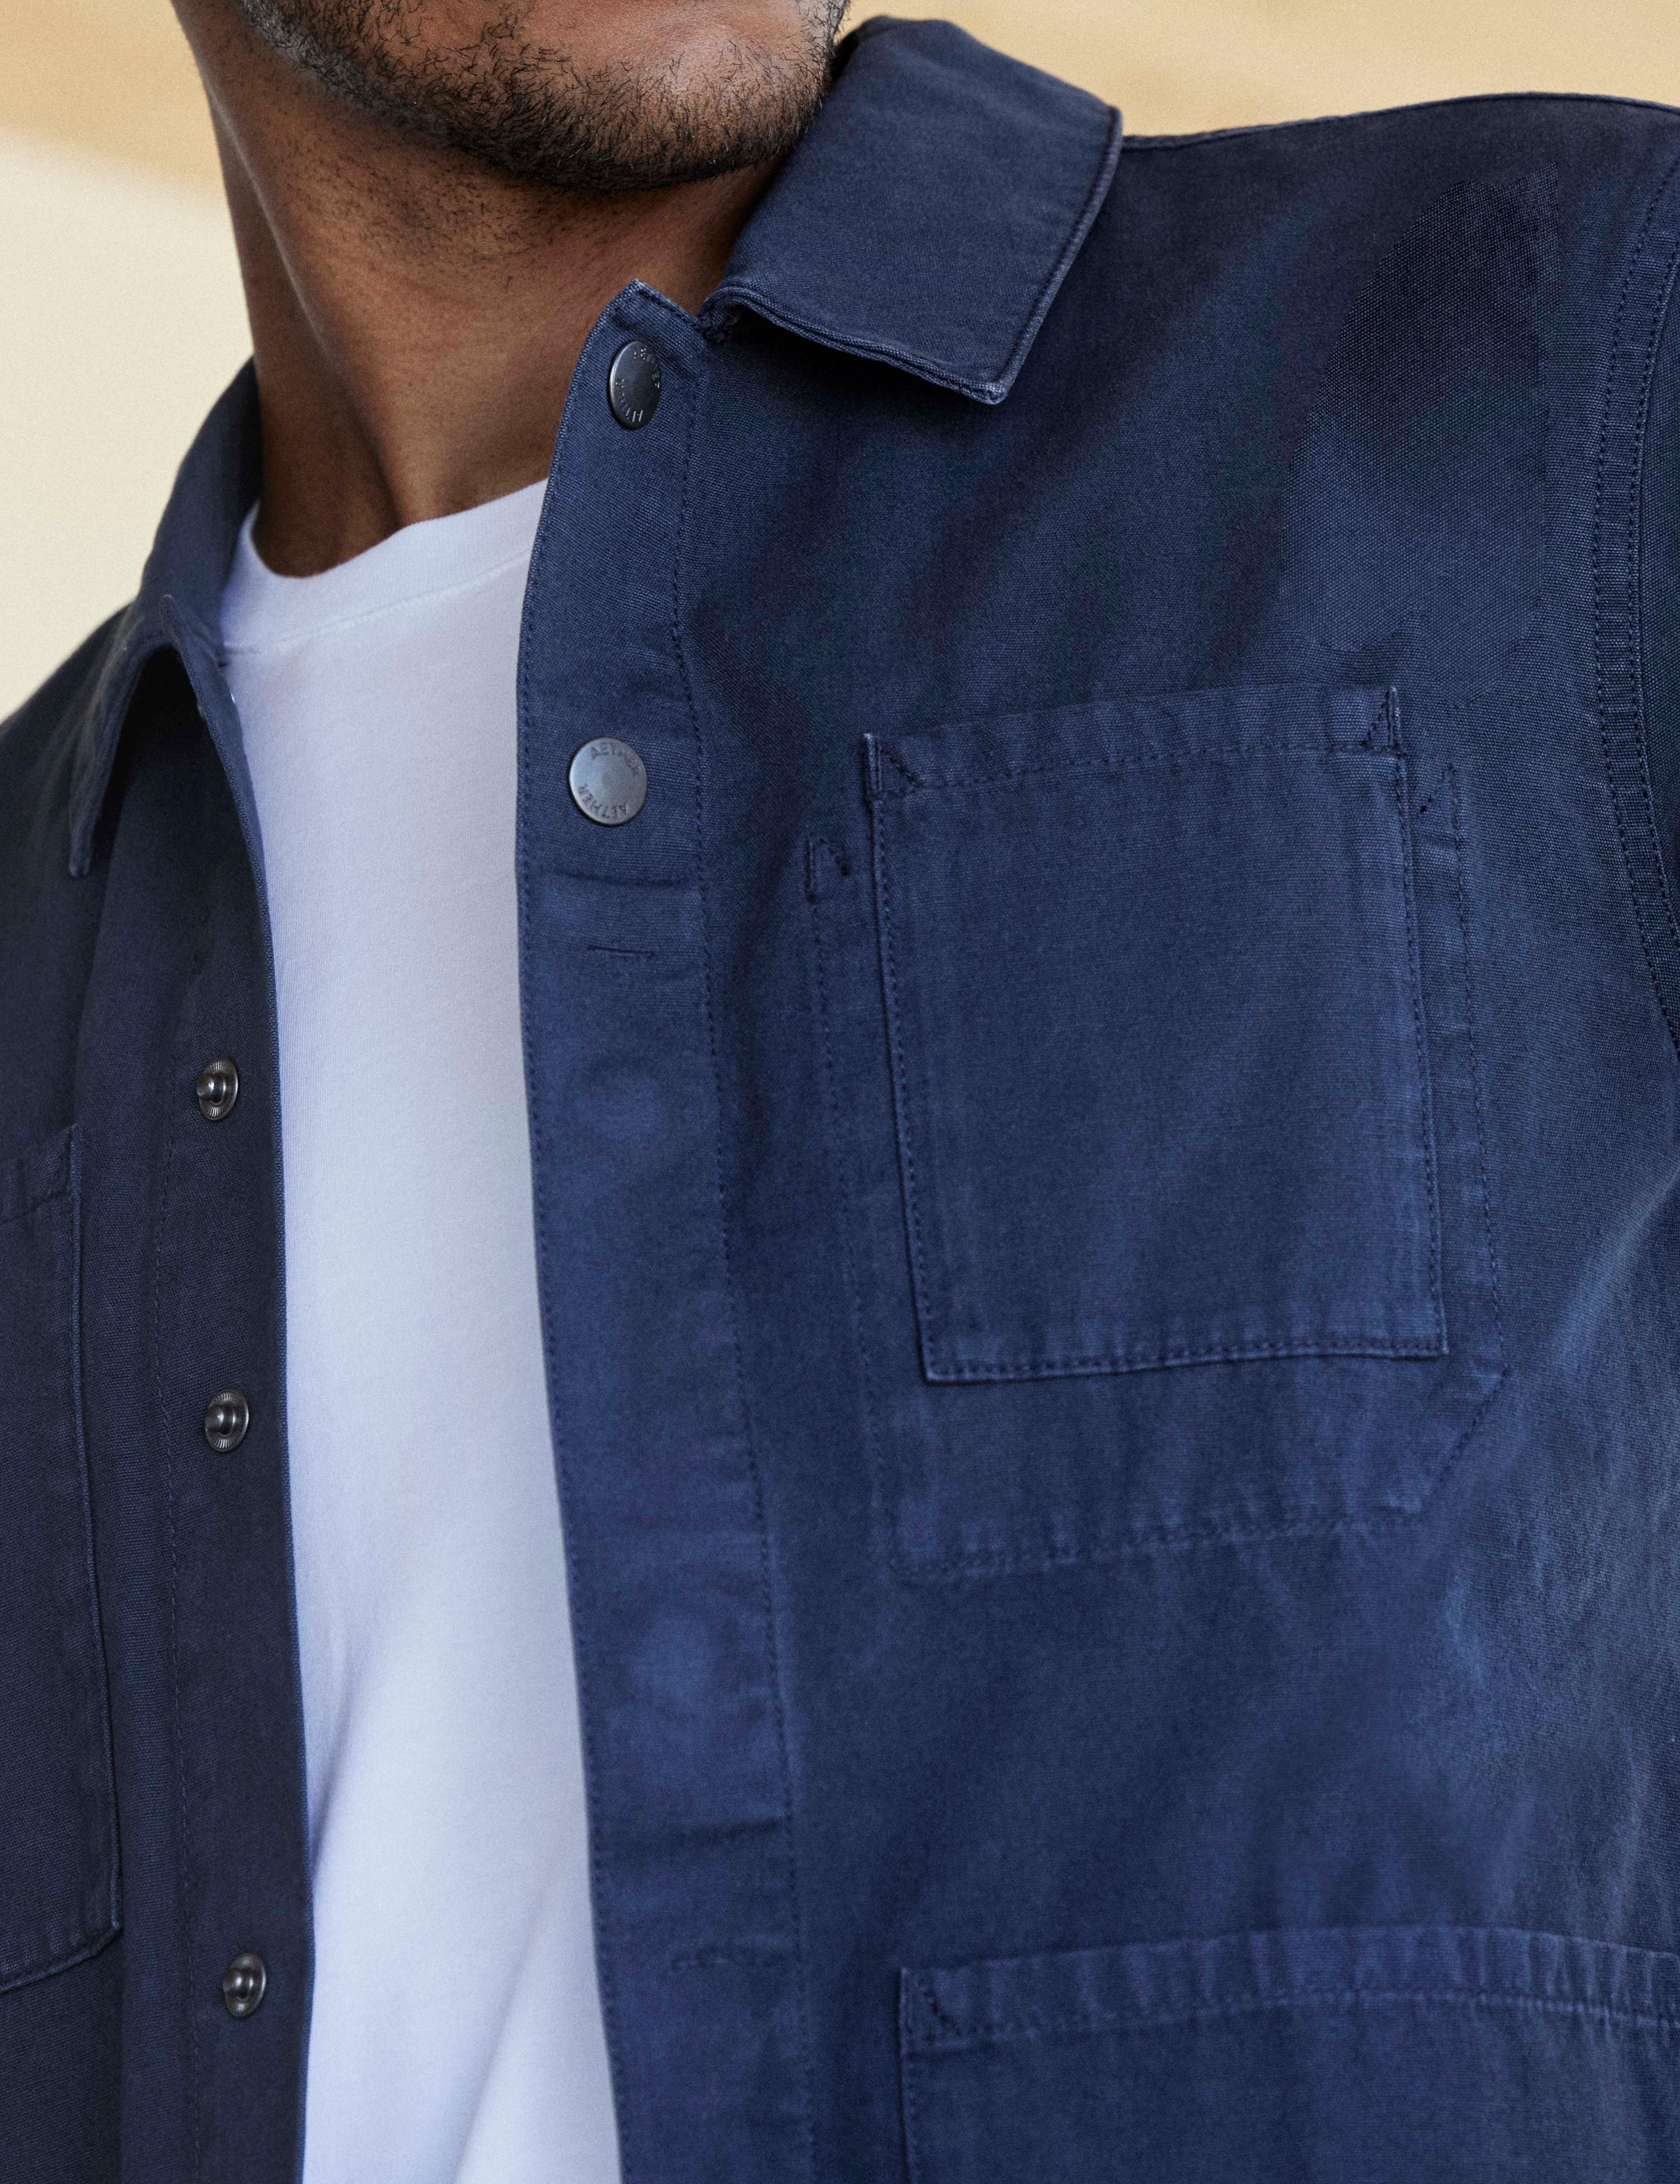 Detail of chest pocket of man wearing Morro Cotton Chore Jacket